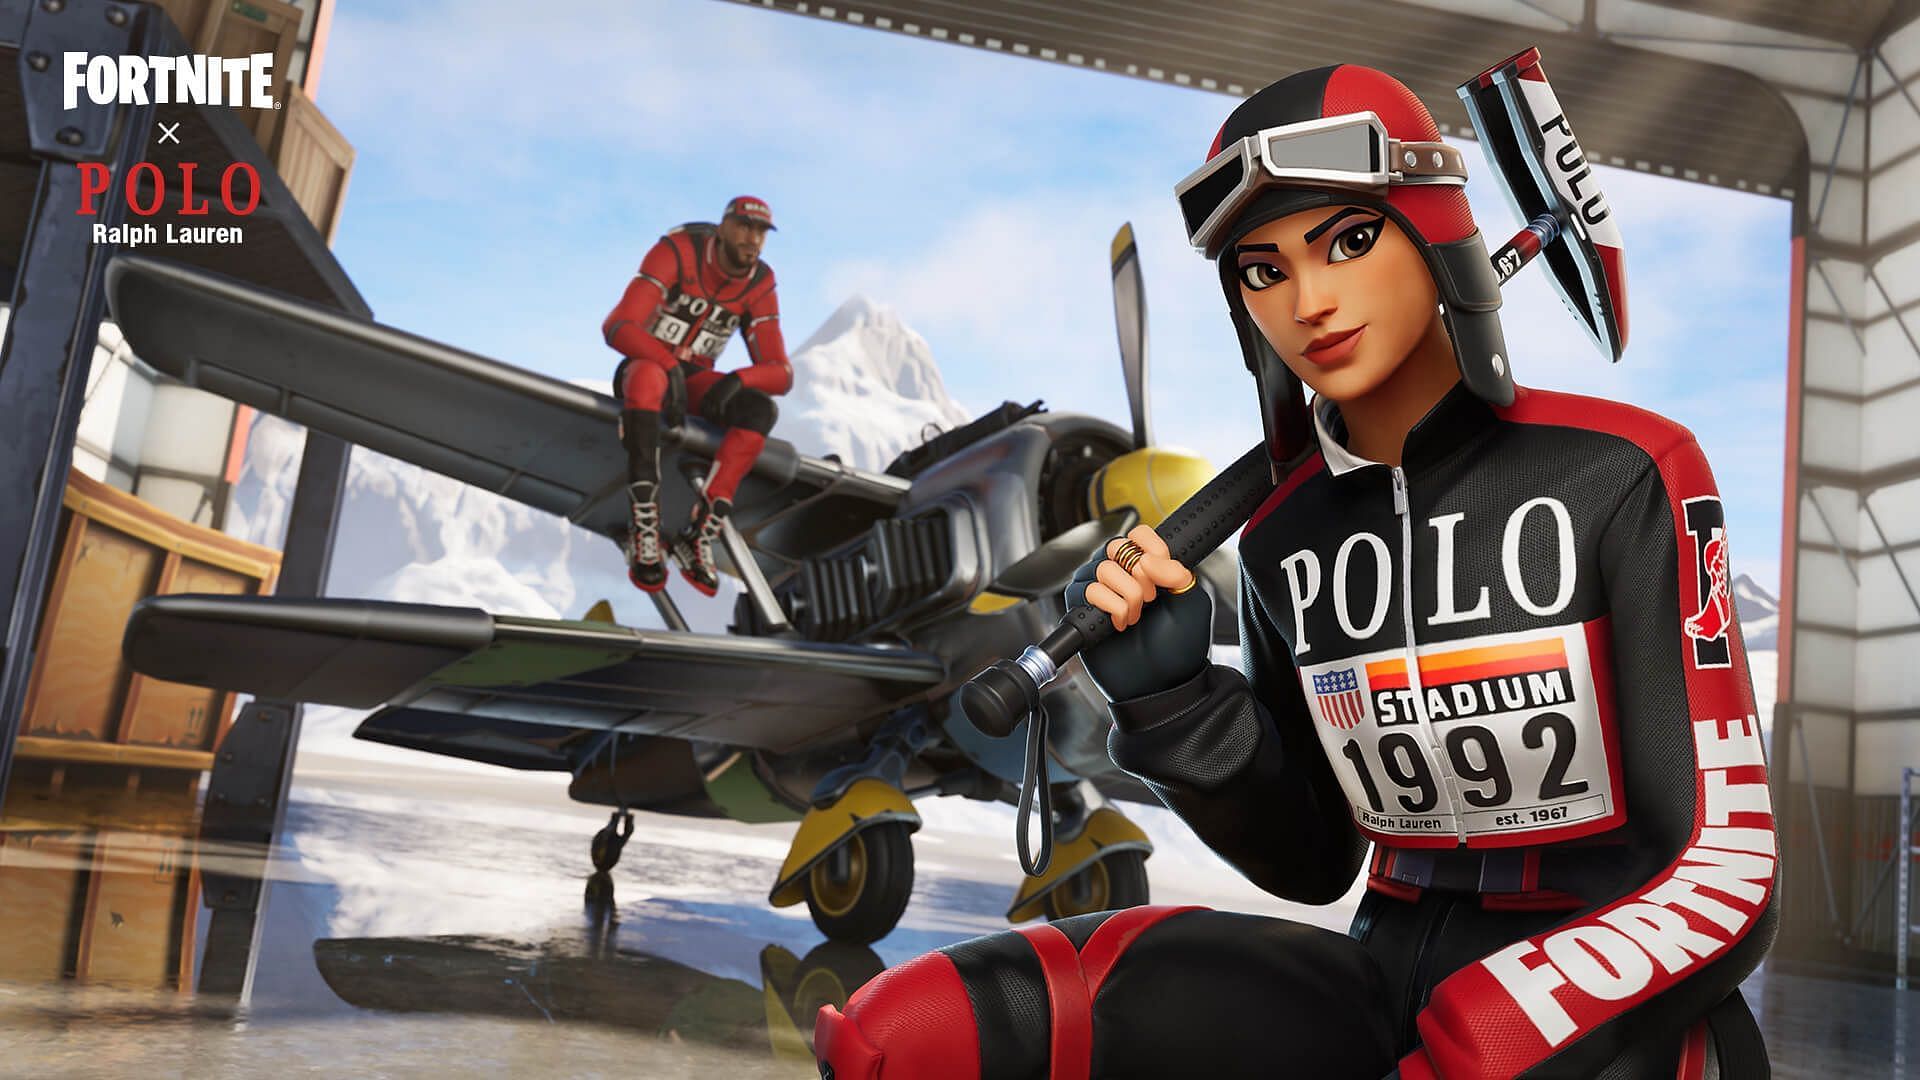 Fortnite x Polo cup brings a lot of free cosmetics (Image via Epic Games)